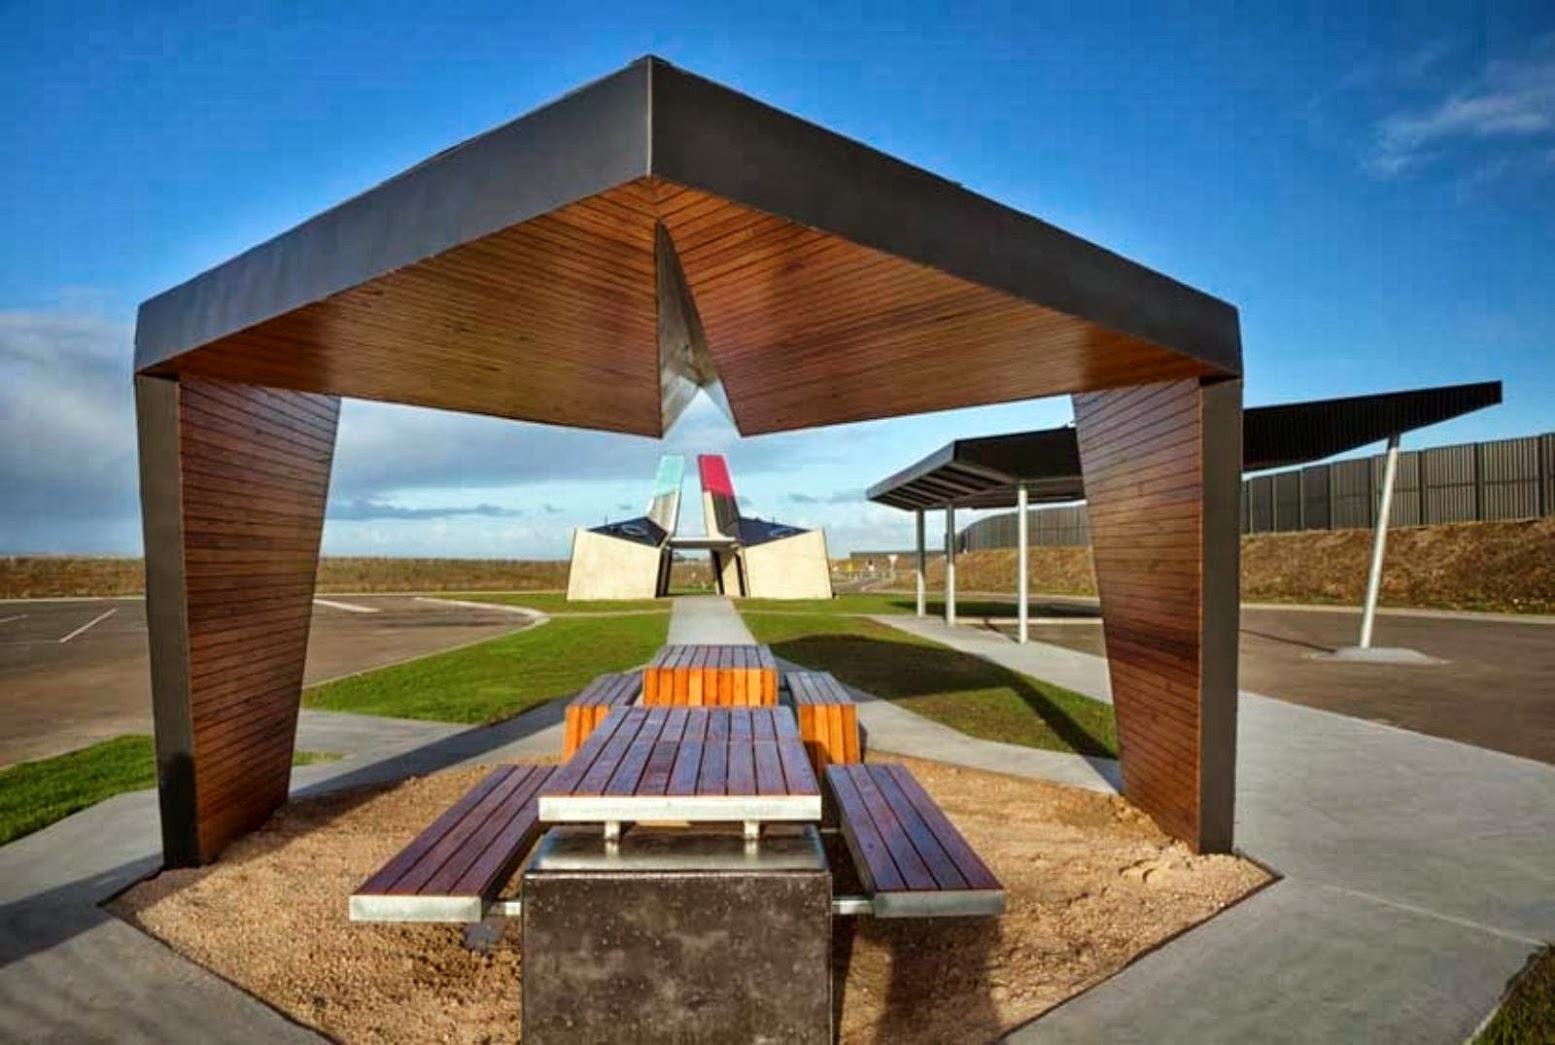 Princes Freeway, Geelong Victoria, Australia: [GEELONG RING ROAD TRUCK STOP REST AREAS BY BKK ARCHITECTS]